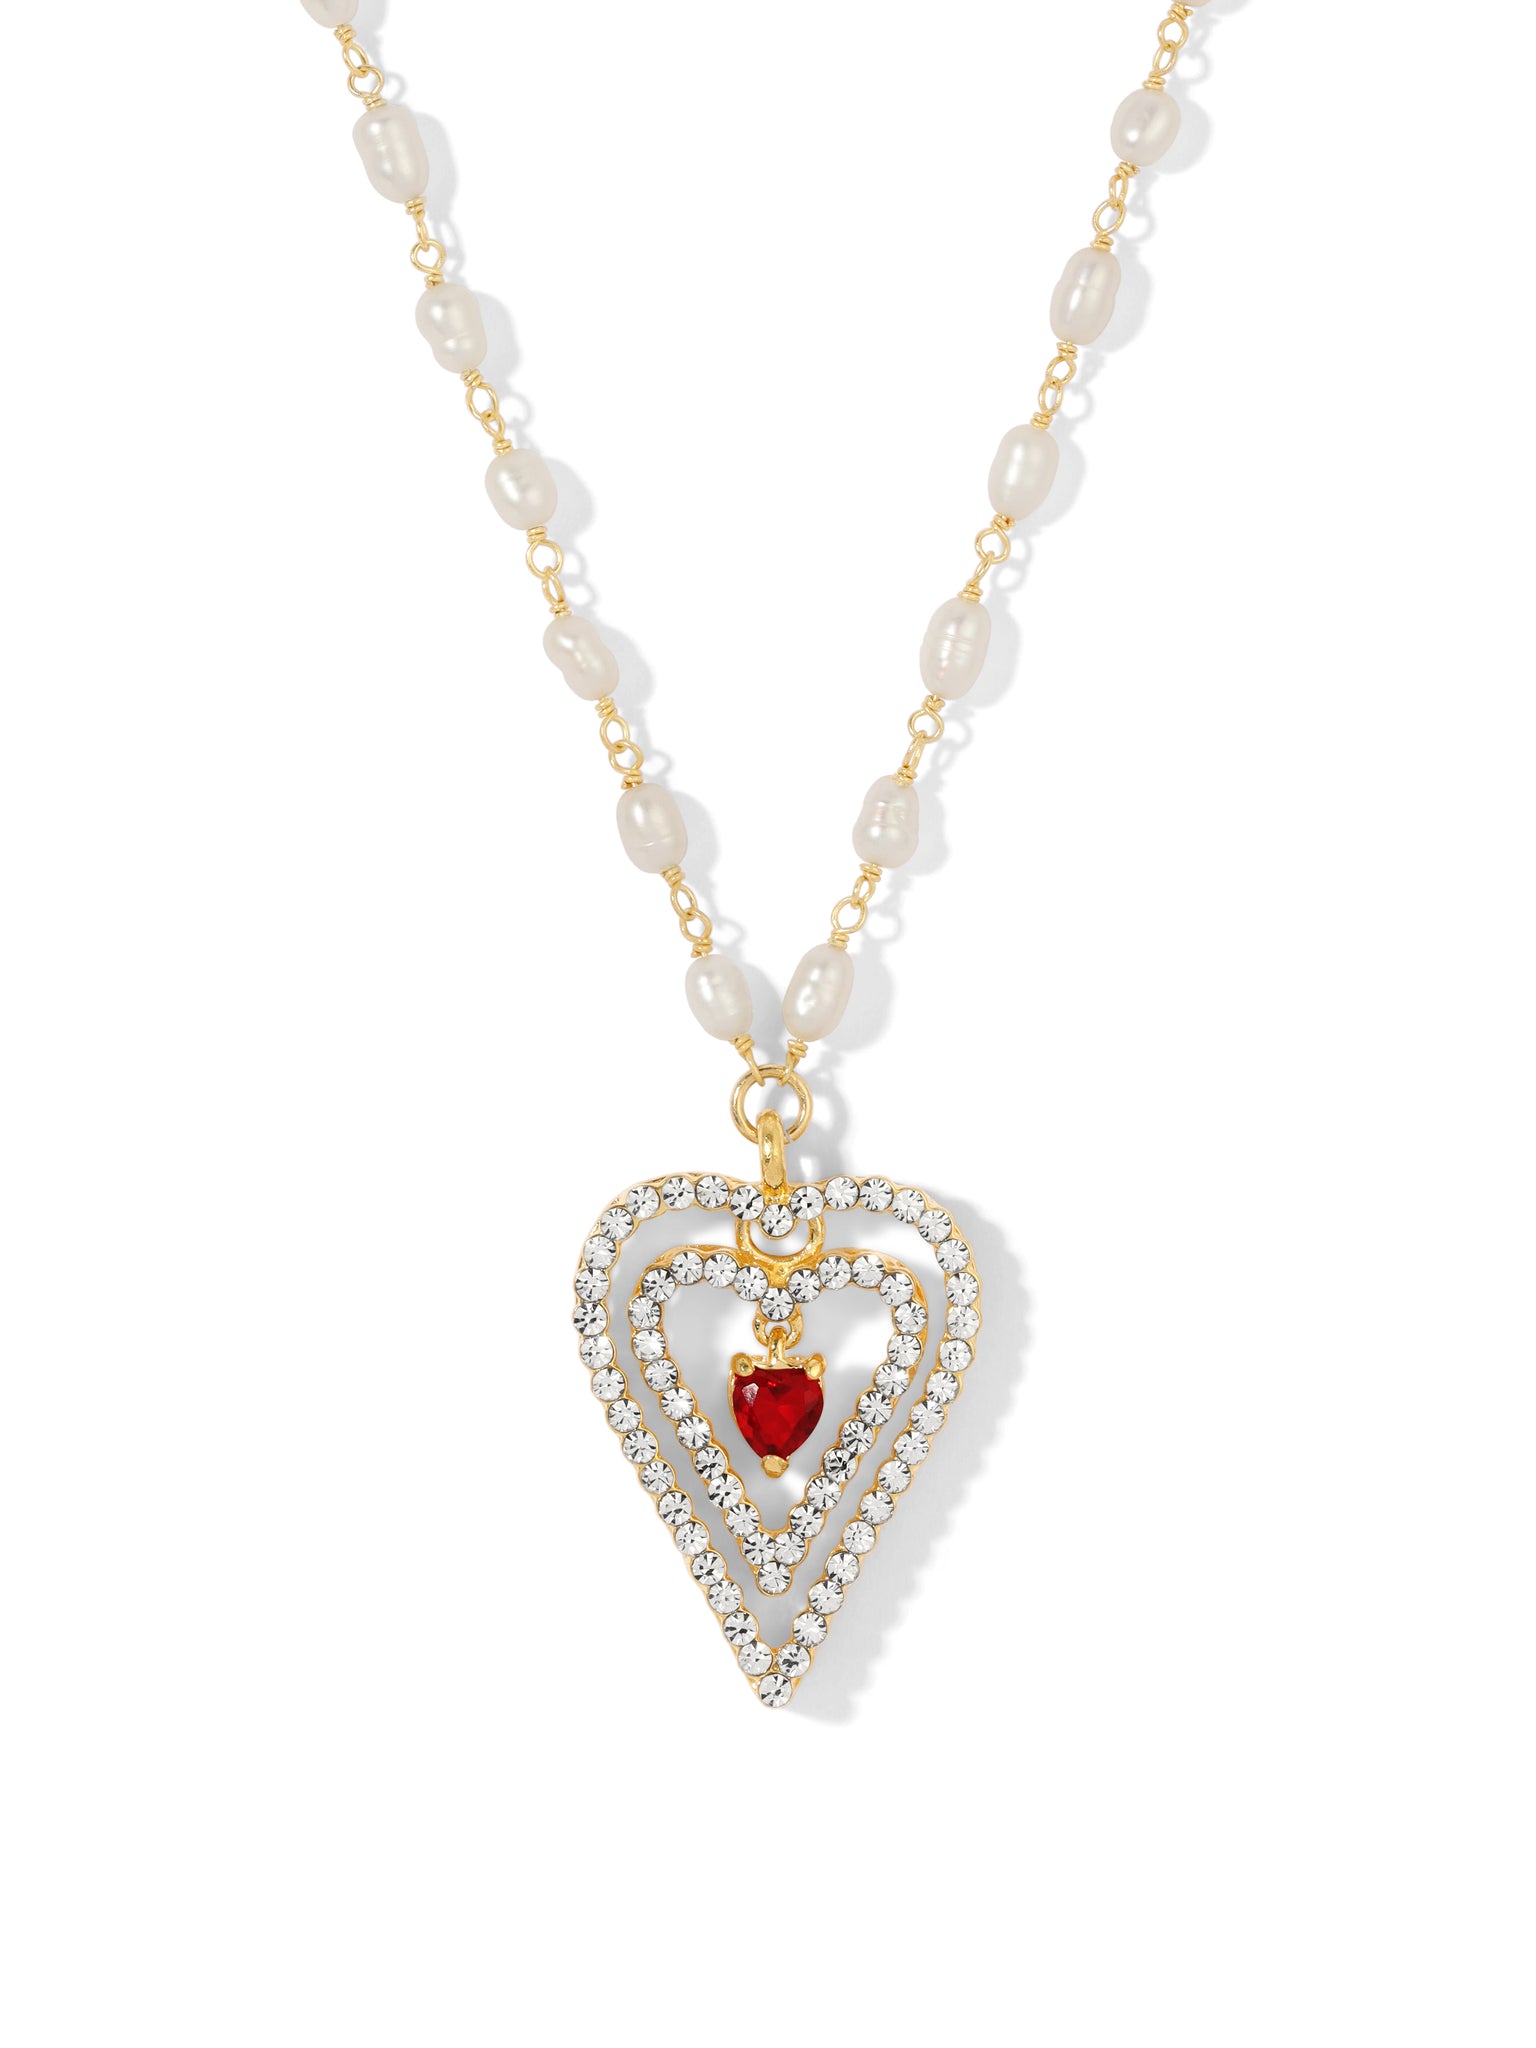 The Core Heart Necklace